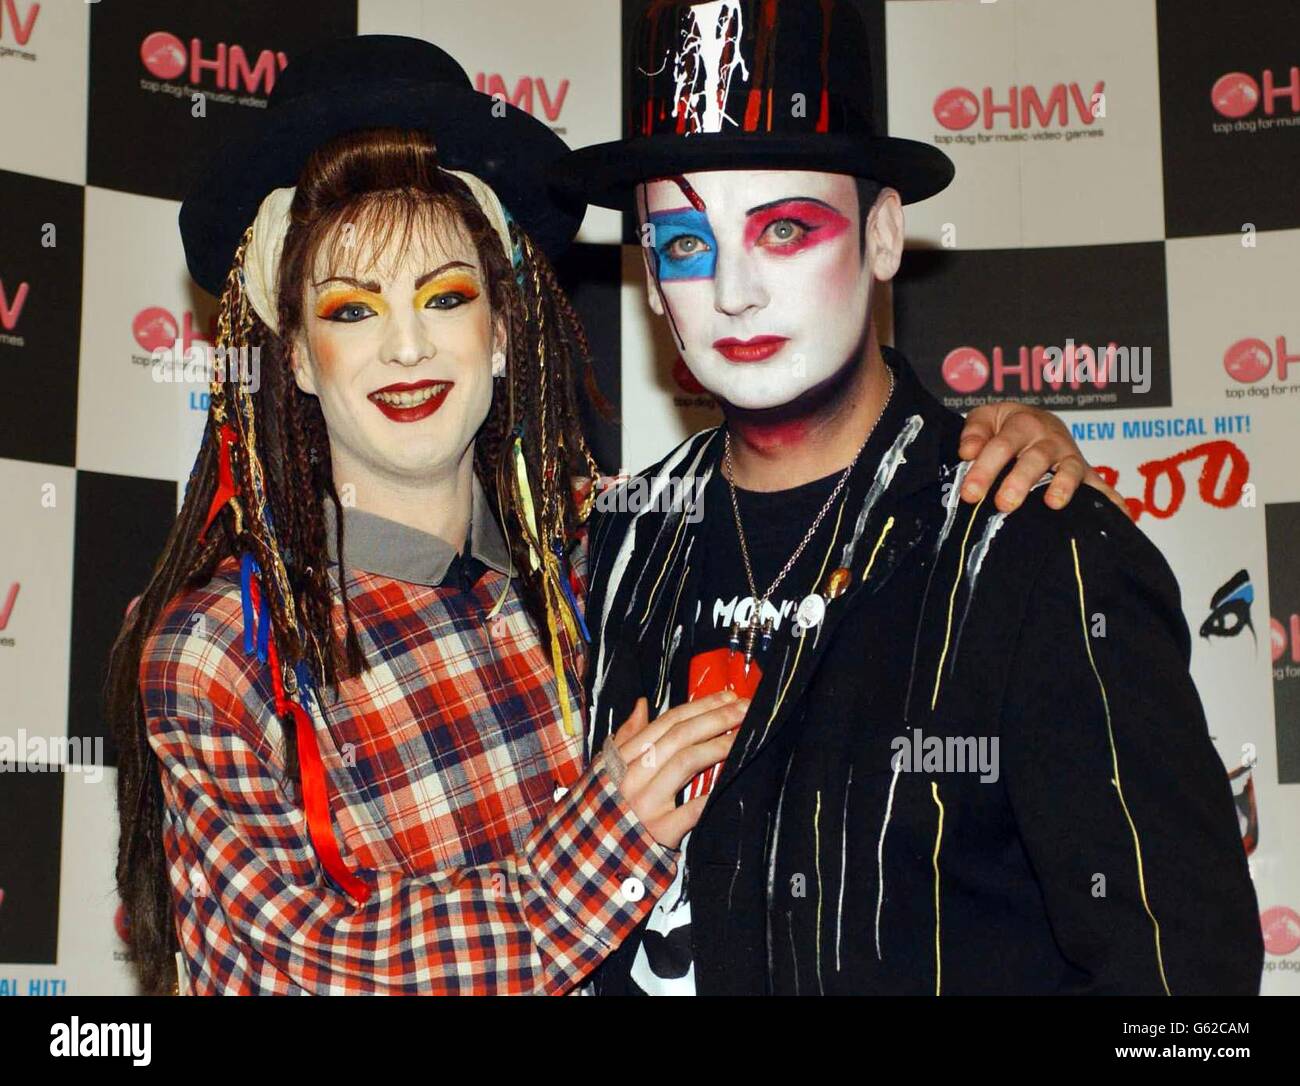 Musician Boy George (right) with actor Euan Morton (who plays George in the musical Taboo) during a signing session for the original cast recording of Taboo at HMV in Oxford Street, London. Stock Photo